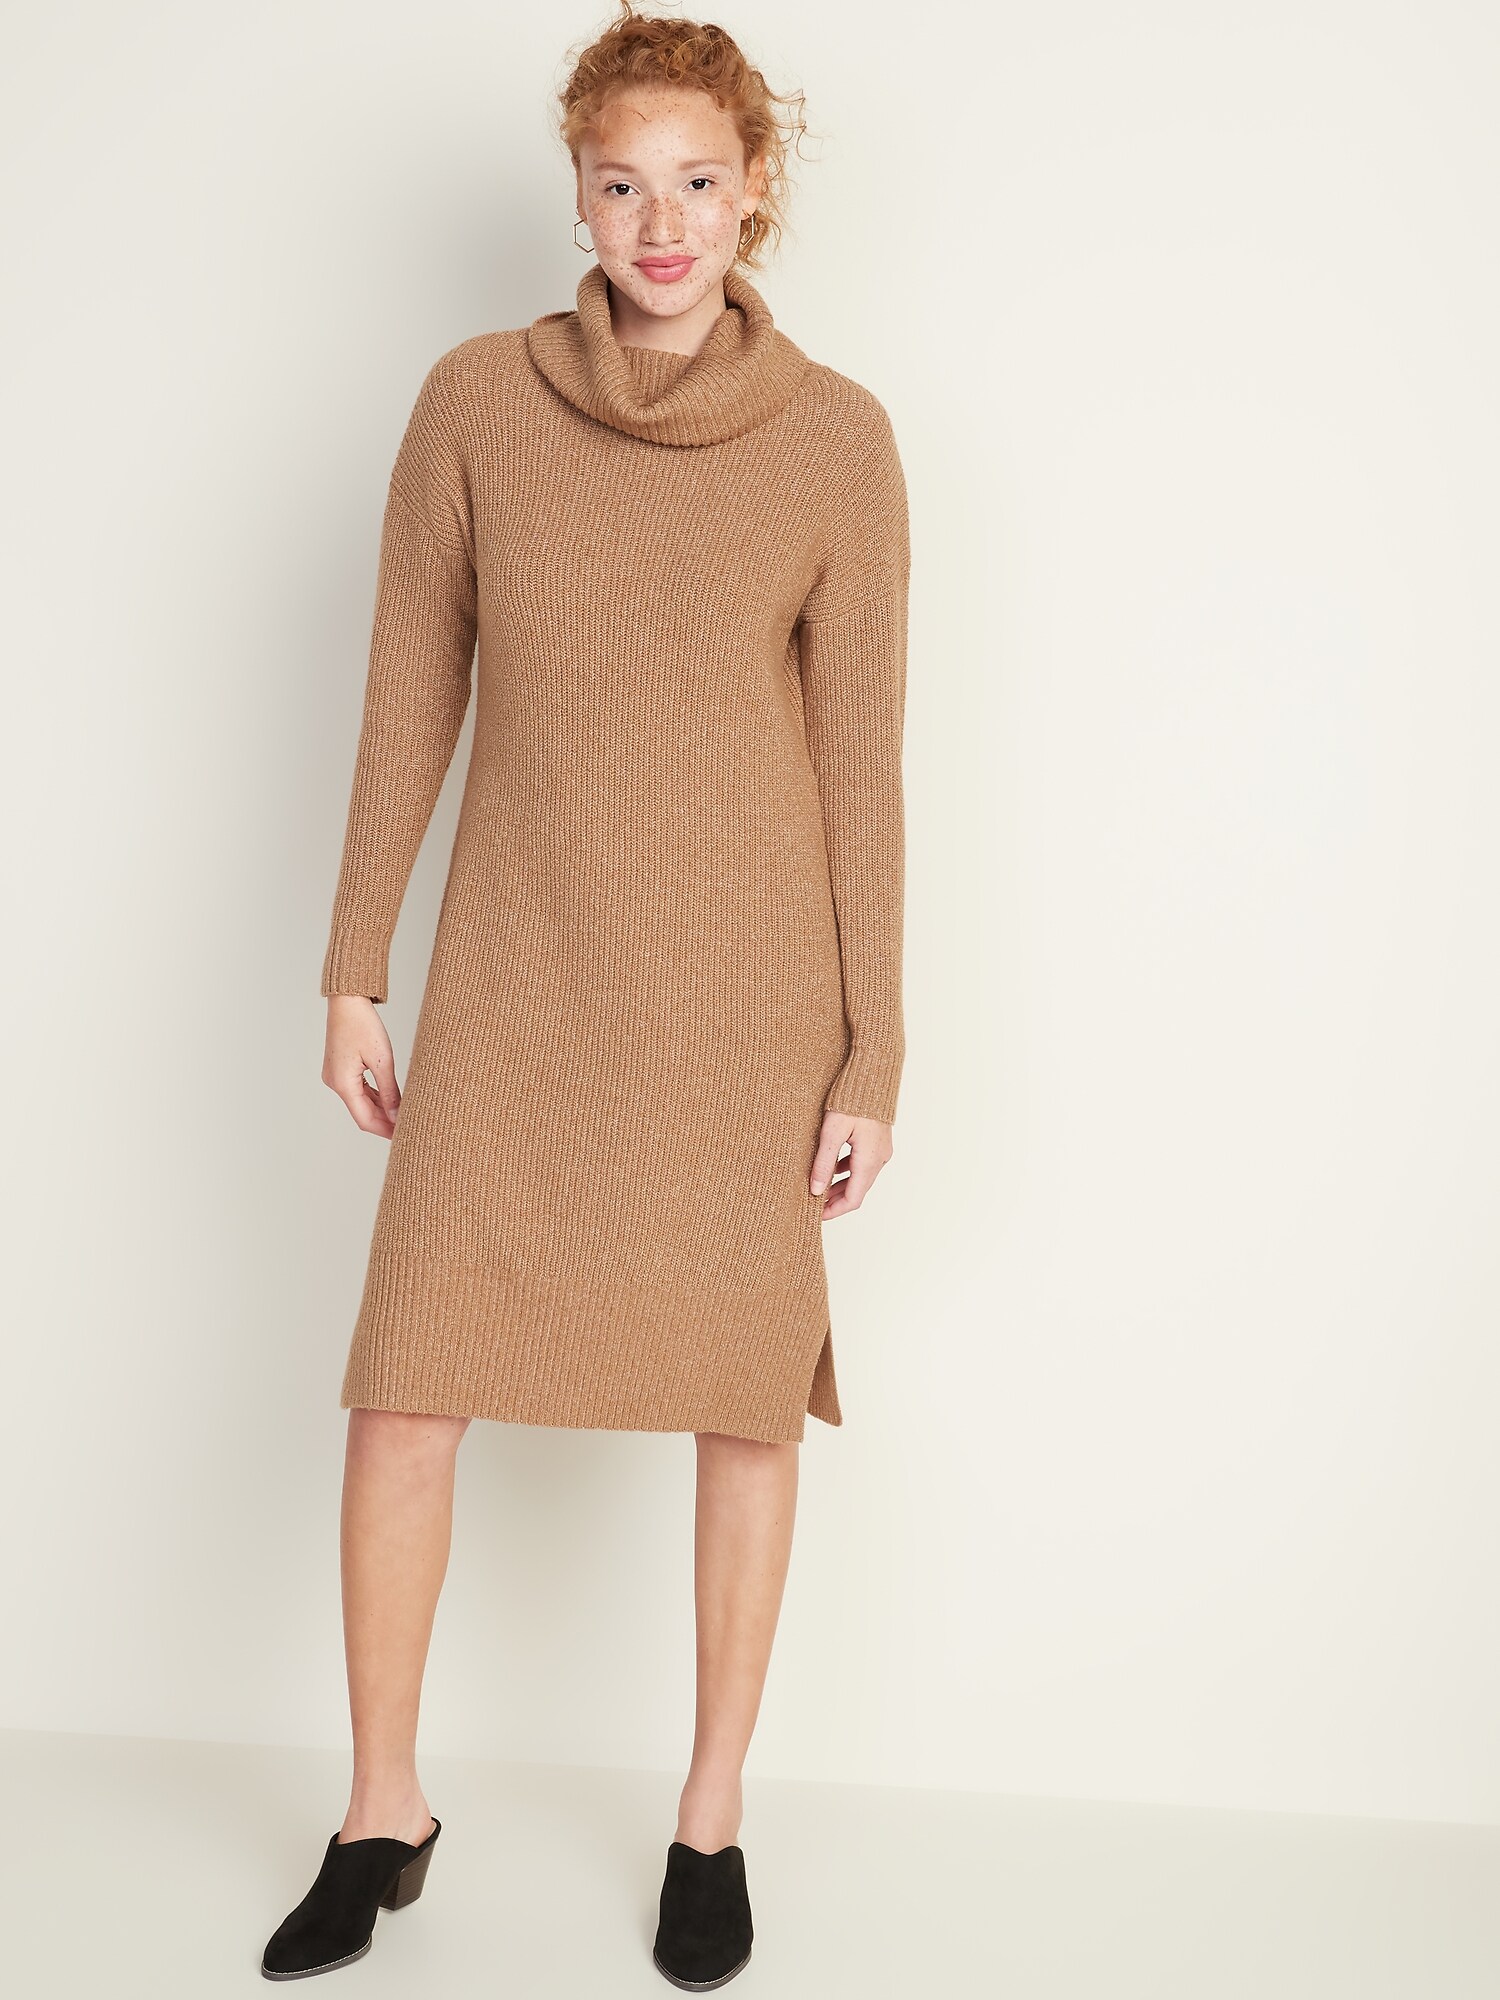 Old Navy Cable Knit Sweater Dresses Old Navy Dresses | Sweater Dress | Po.....